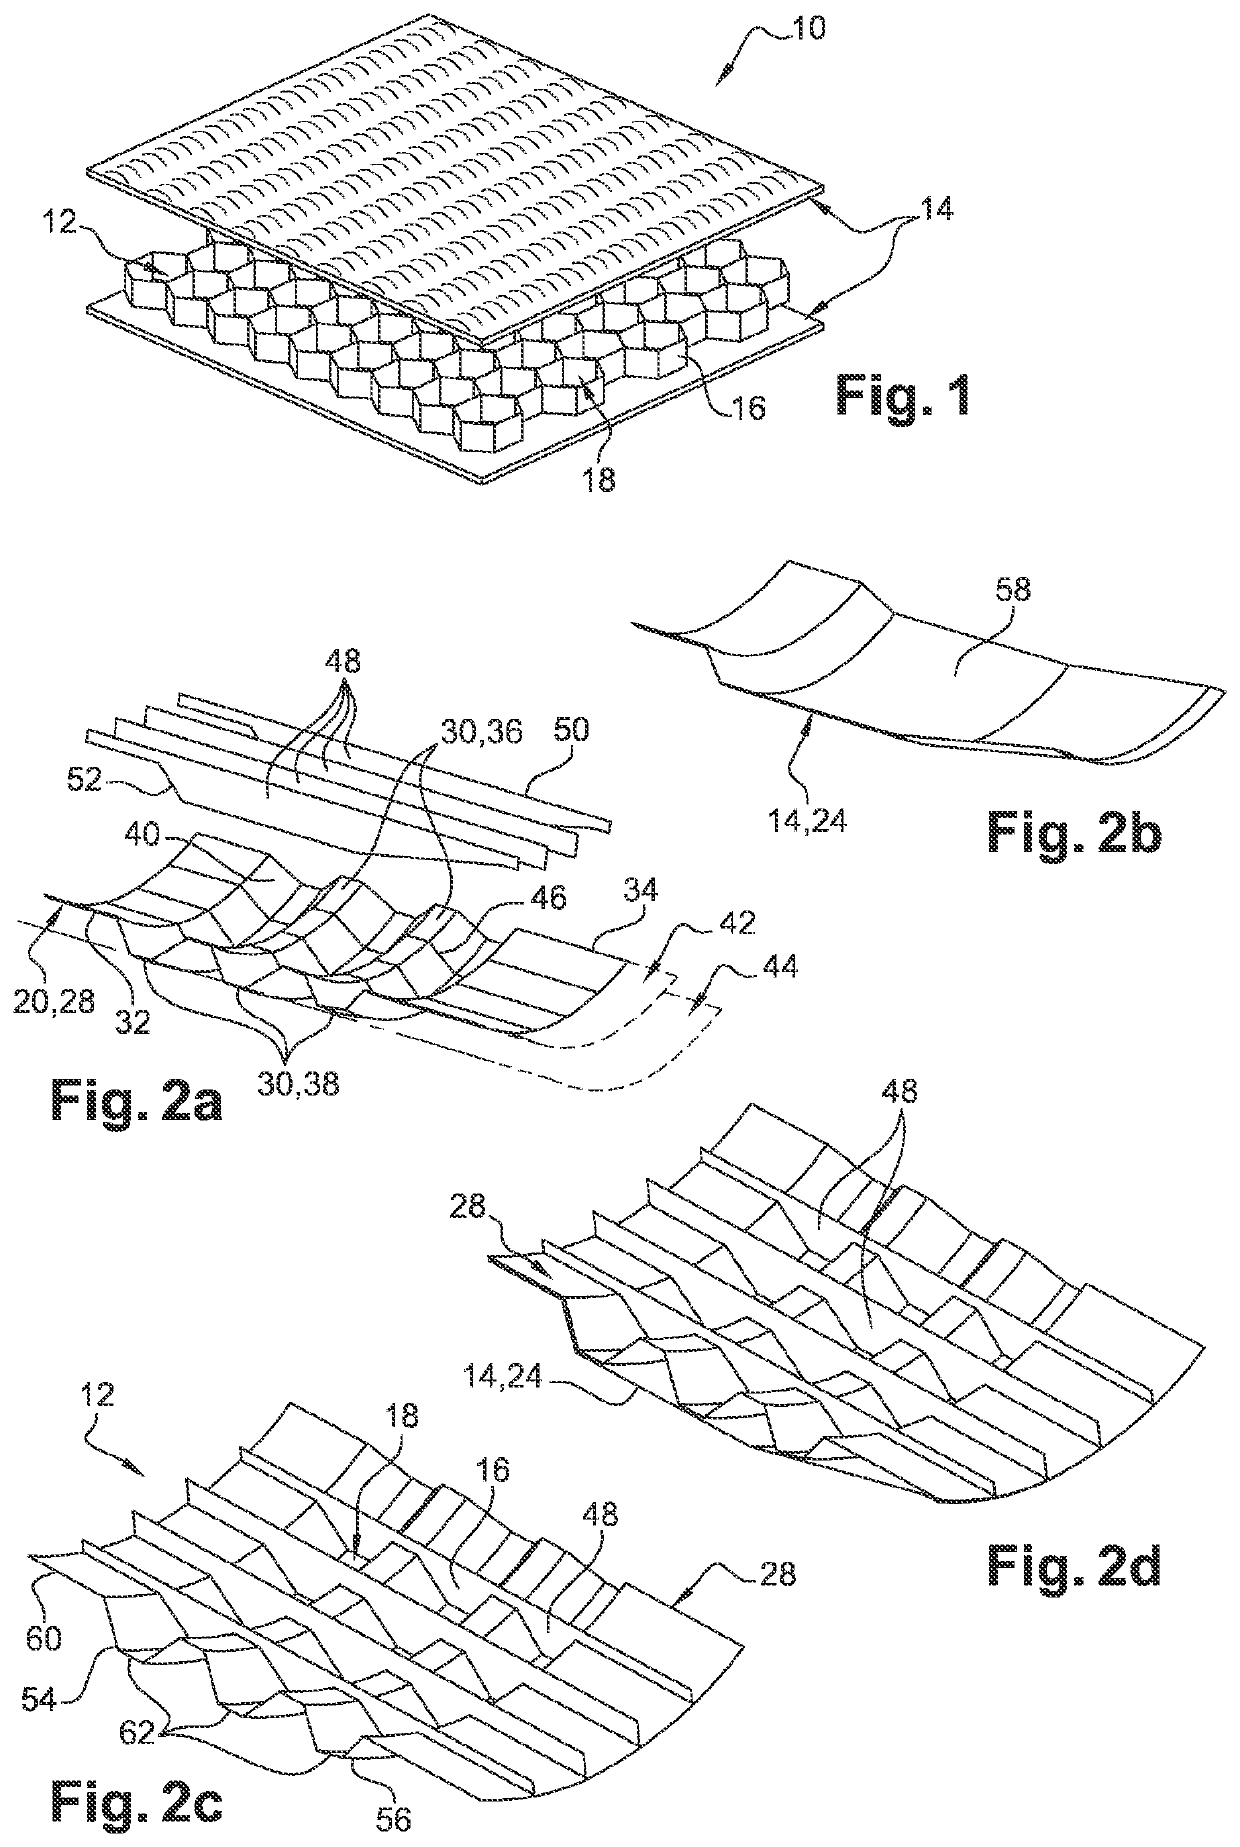 Method for manufacturing an acoustic panel